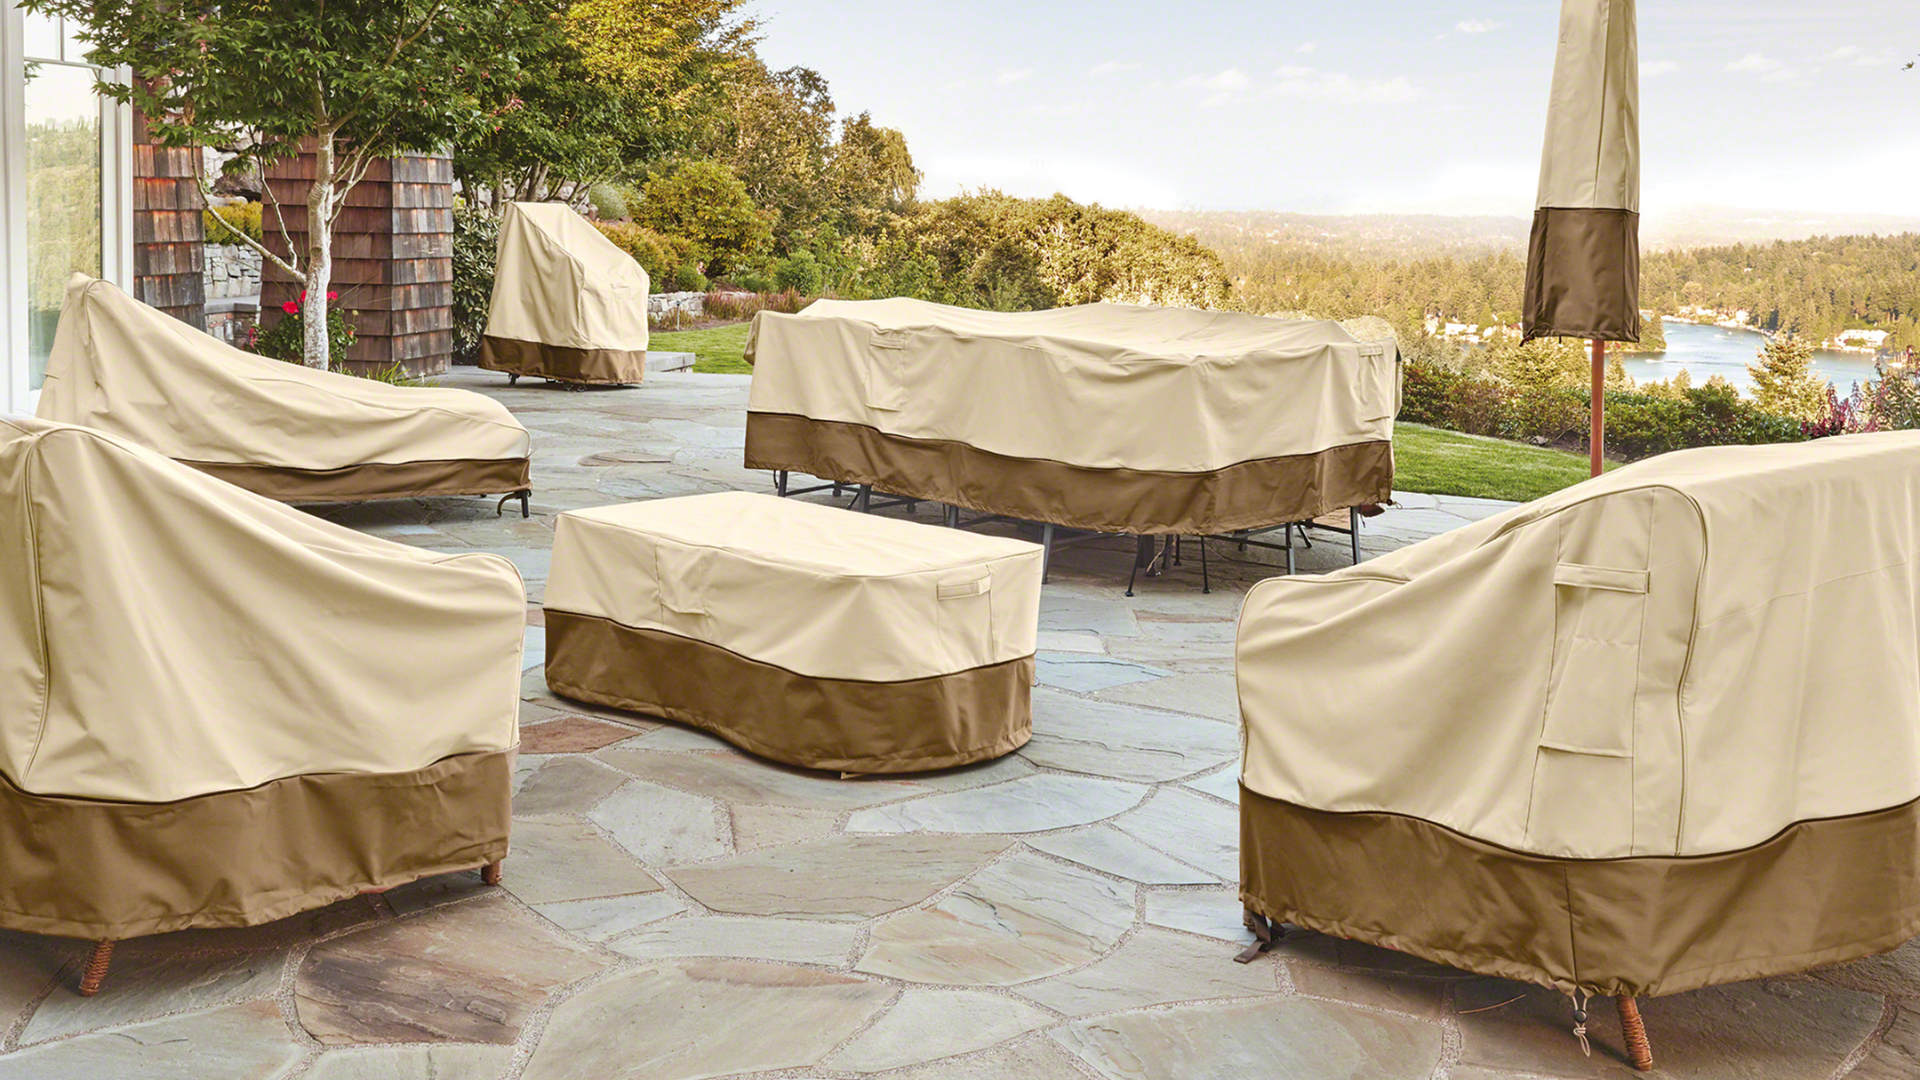 Vailge Patio Chair Covers Heavy Duty and Waterproof Outdoor Lawn Patio Furniture Covers 2 Pack - Medium, Beige & Brown Lounge Deep Seat Cover 